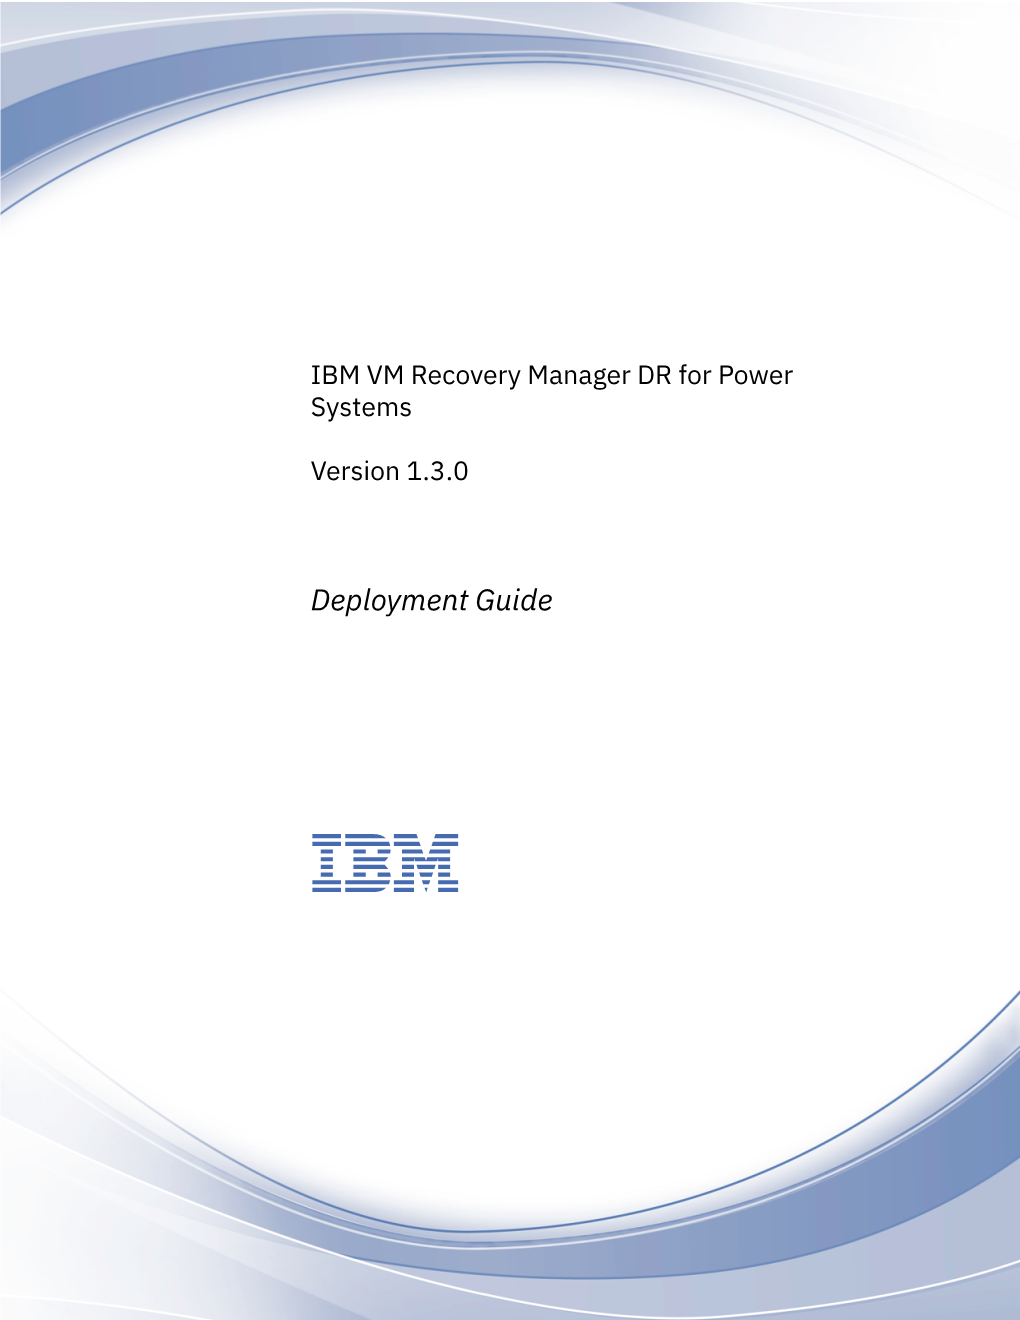 IBM VM Recovery Manager DR for Power Systems Version 1.3.0: Deployment Guide Overview for IBM VM Recovery Manager DR for Power Systems